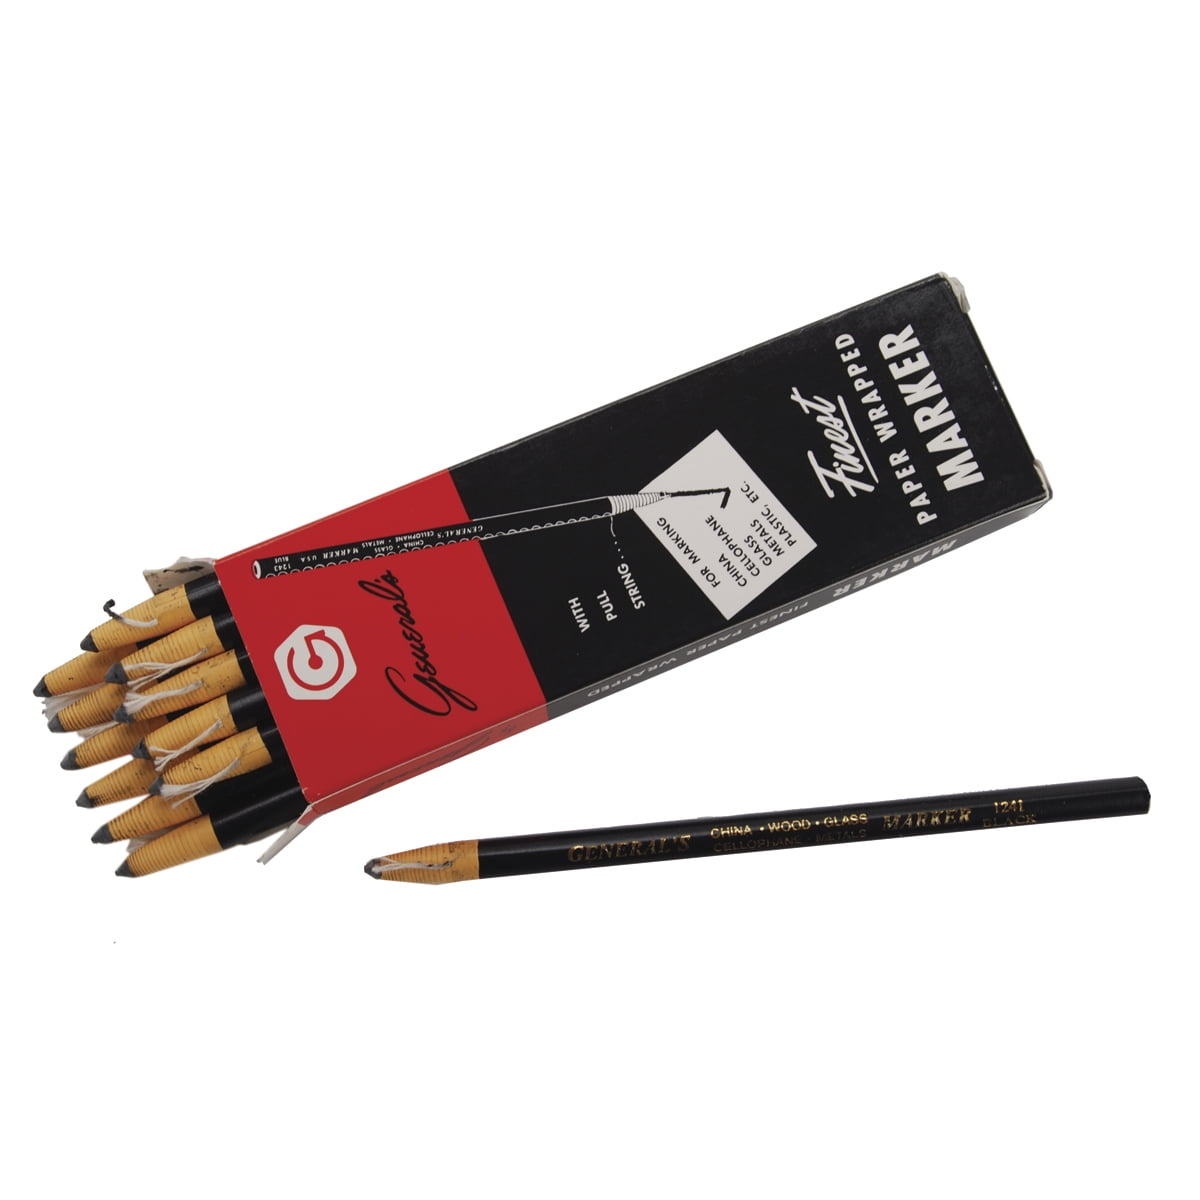 Markal - Paper-wrapped marker, grease pencil - 00054247 - MSC Industrial  Supply